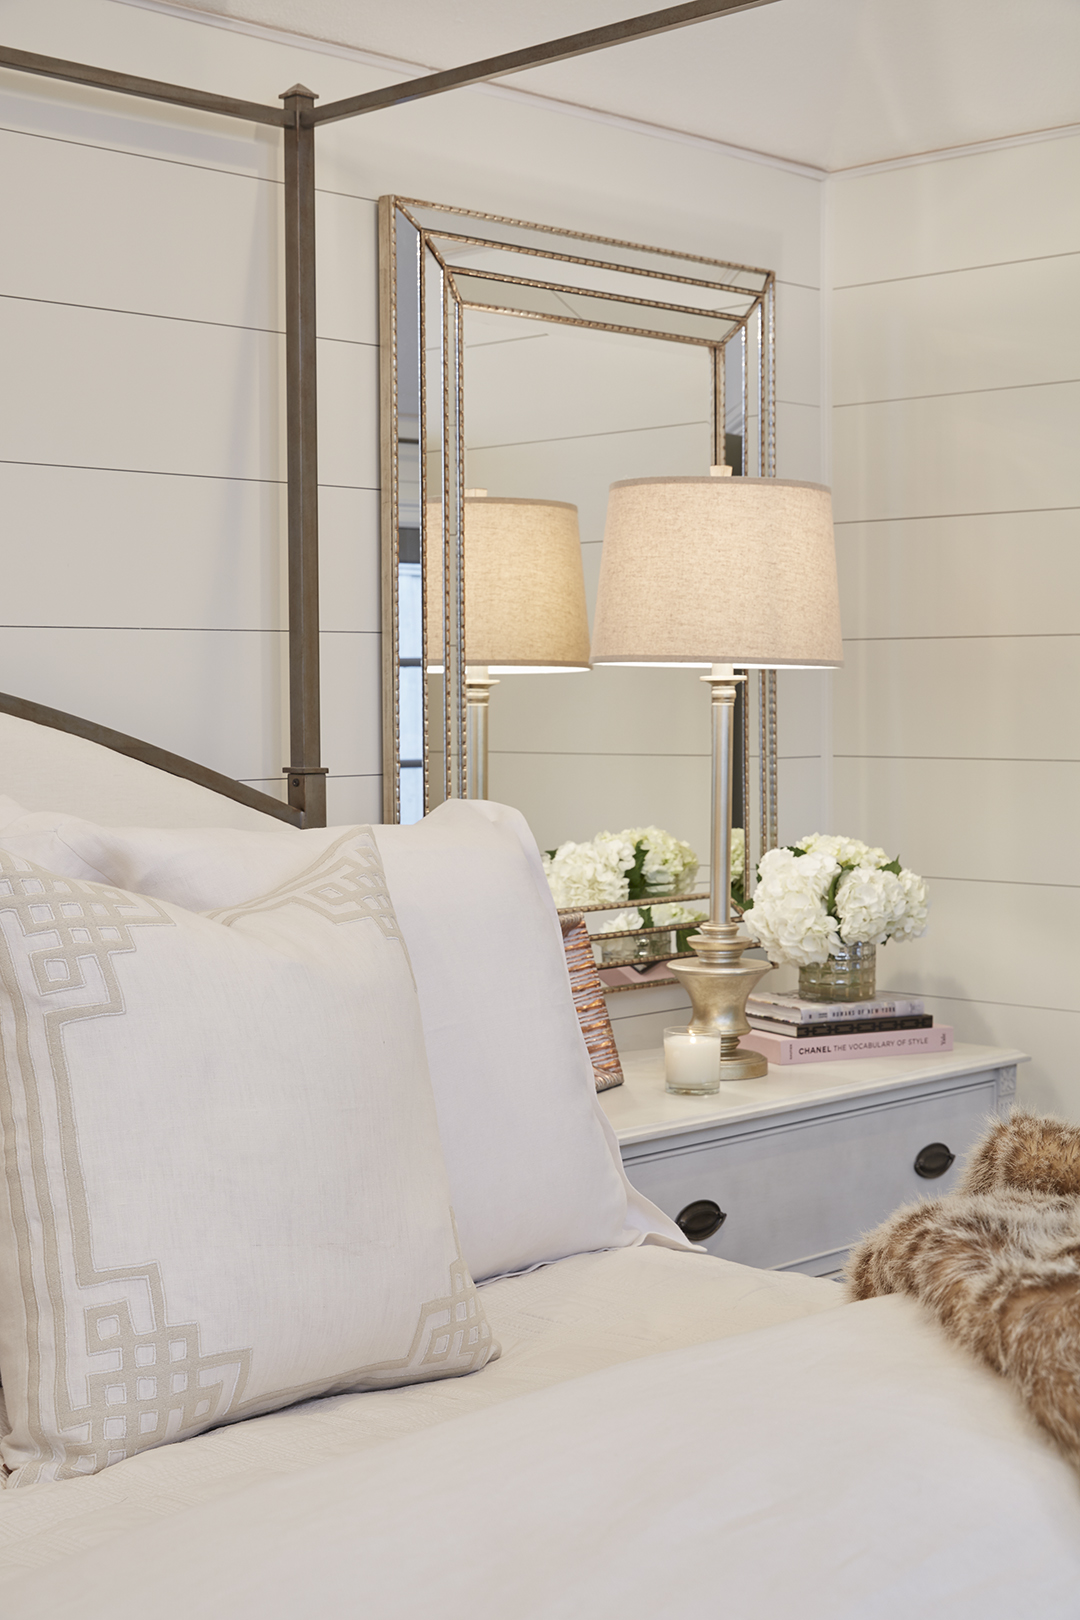 The shiplap continues into the master bedroom. Like the master bathroom, it offers a chic, glamorous take on farmhouse styling.